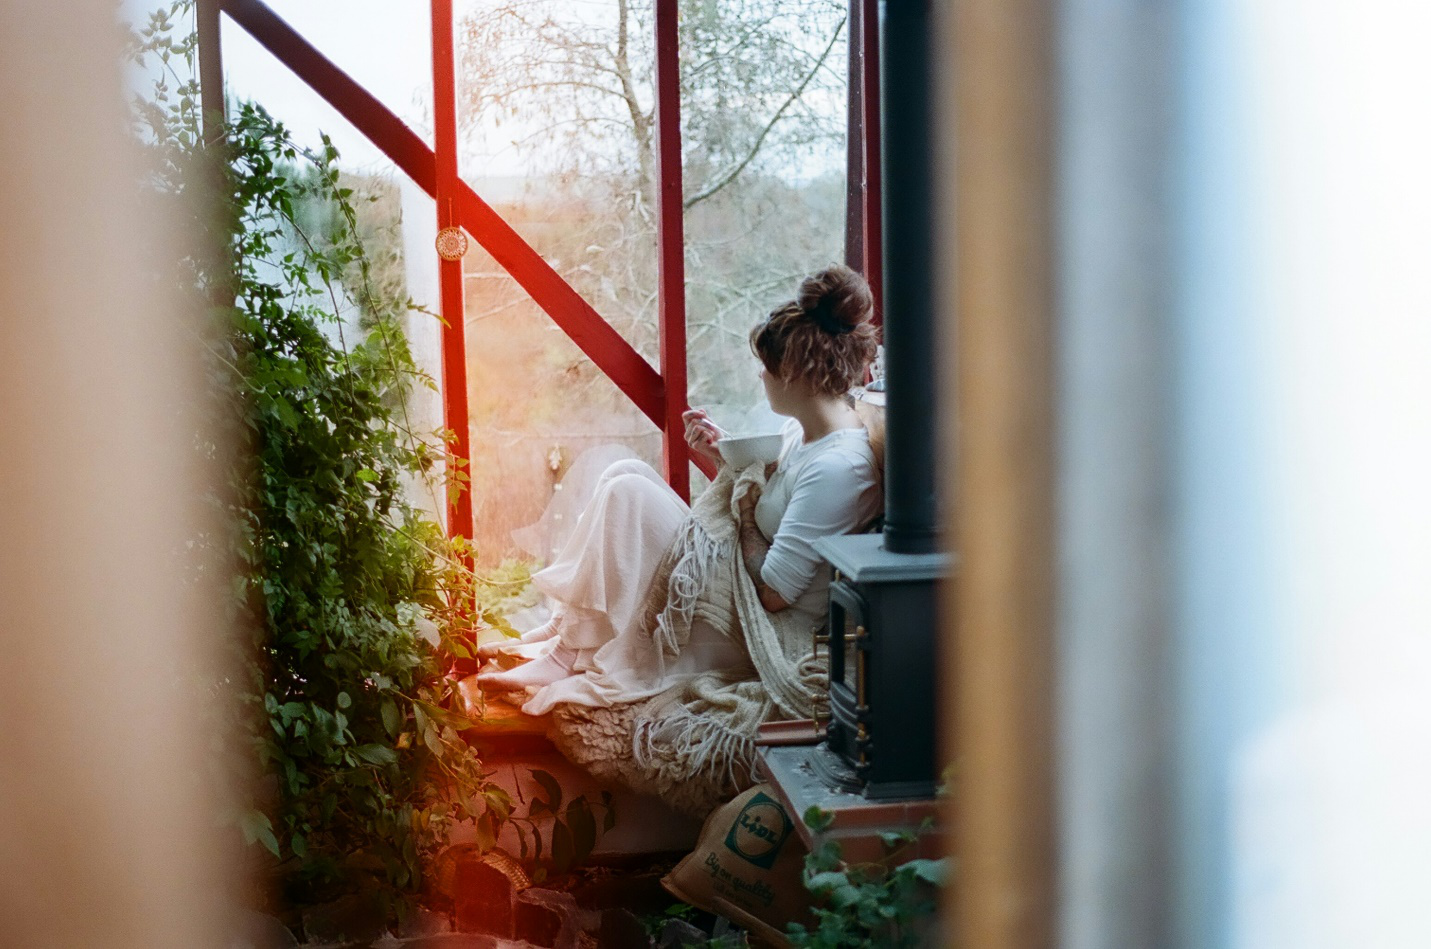 A woman in off-white sits with a bowl bundled up on a bench by a window with plants and shrubbery